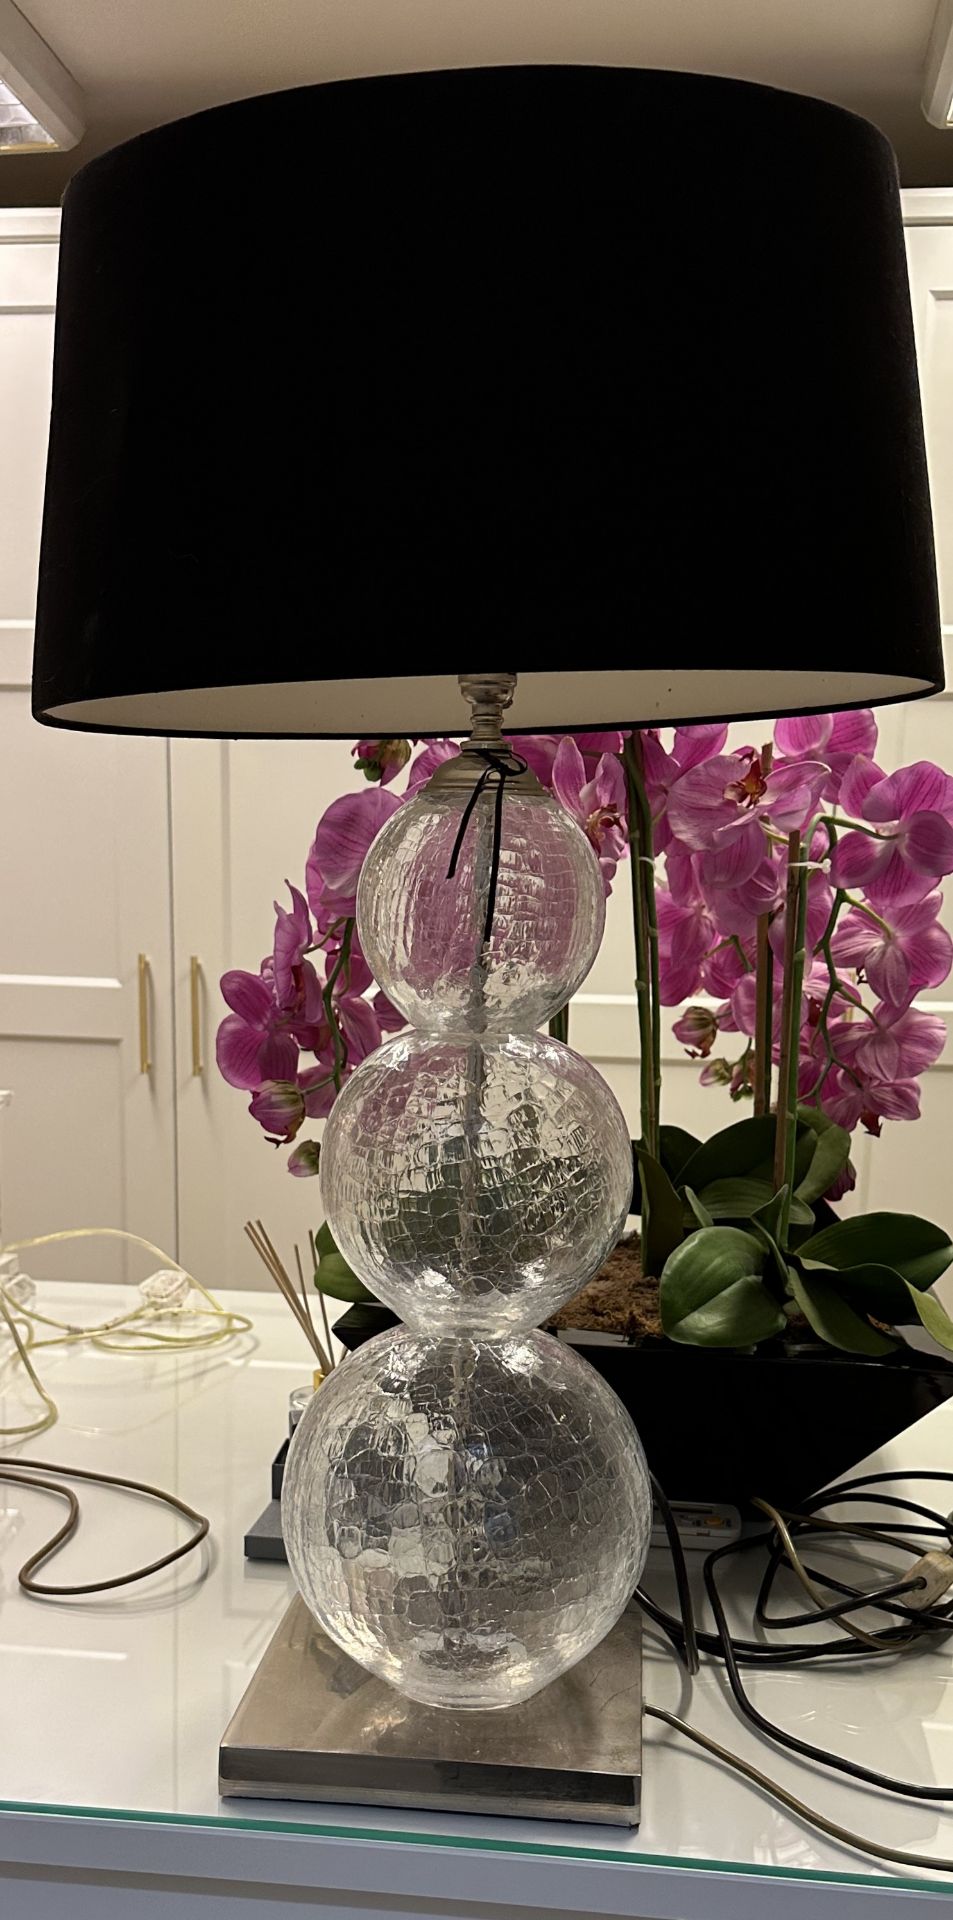 1 x Beautiful PORTO ROMANO Crystal Glass Lamp And Suedette Shade